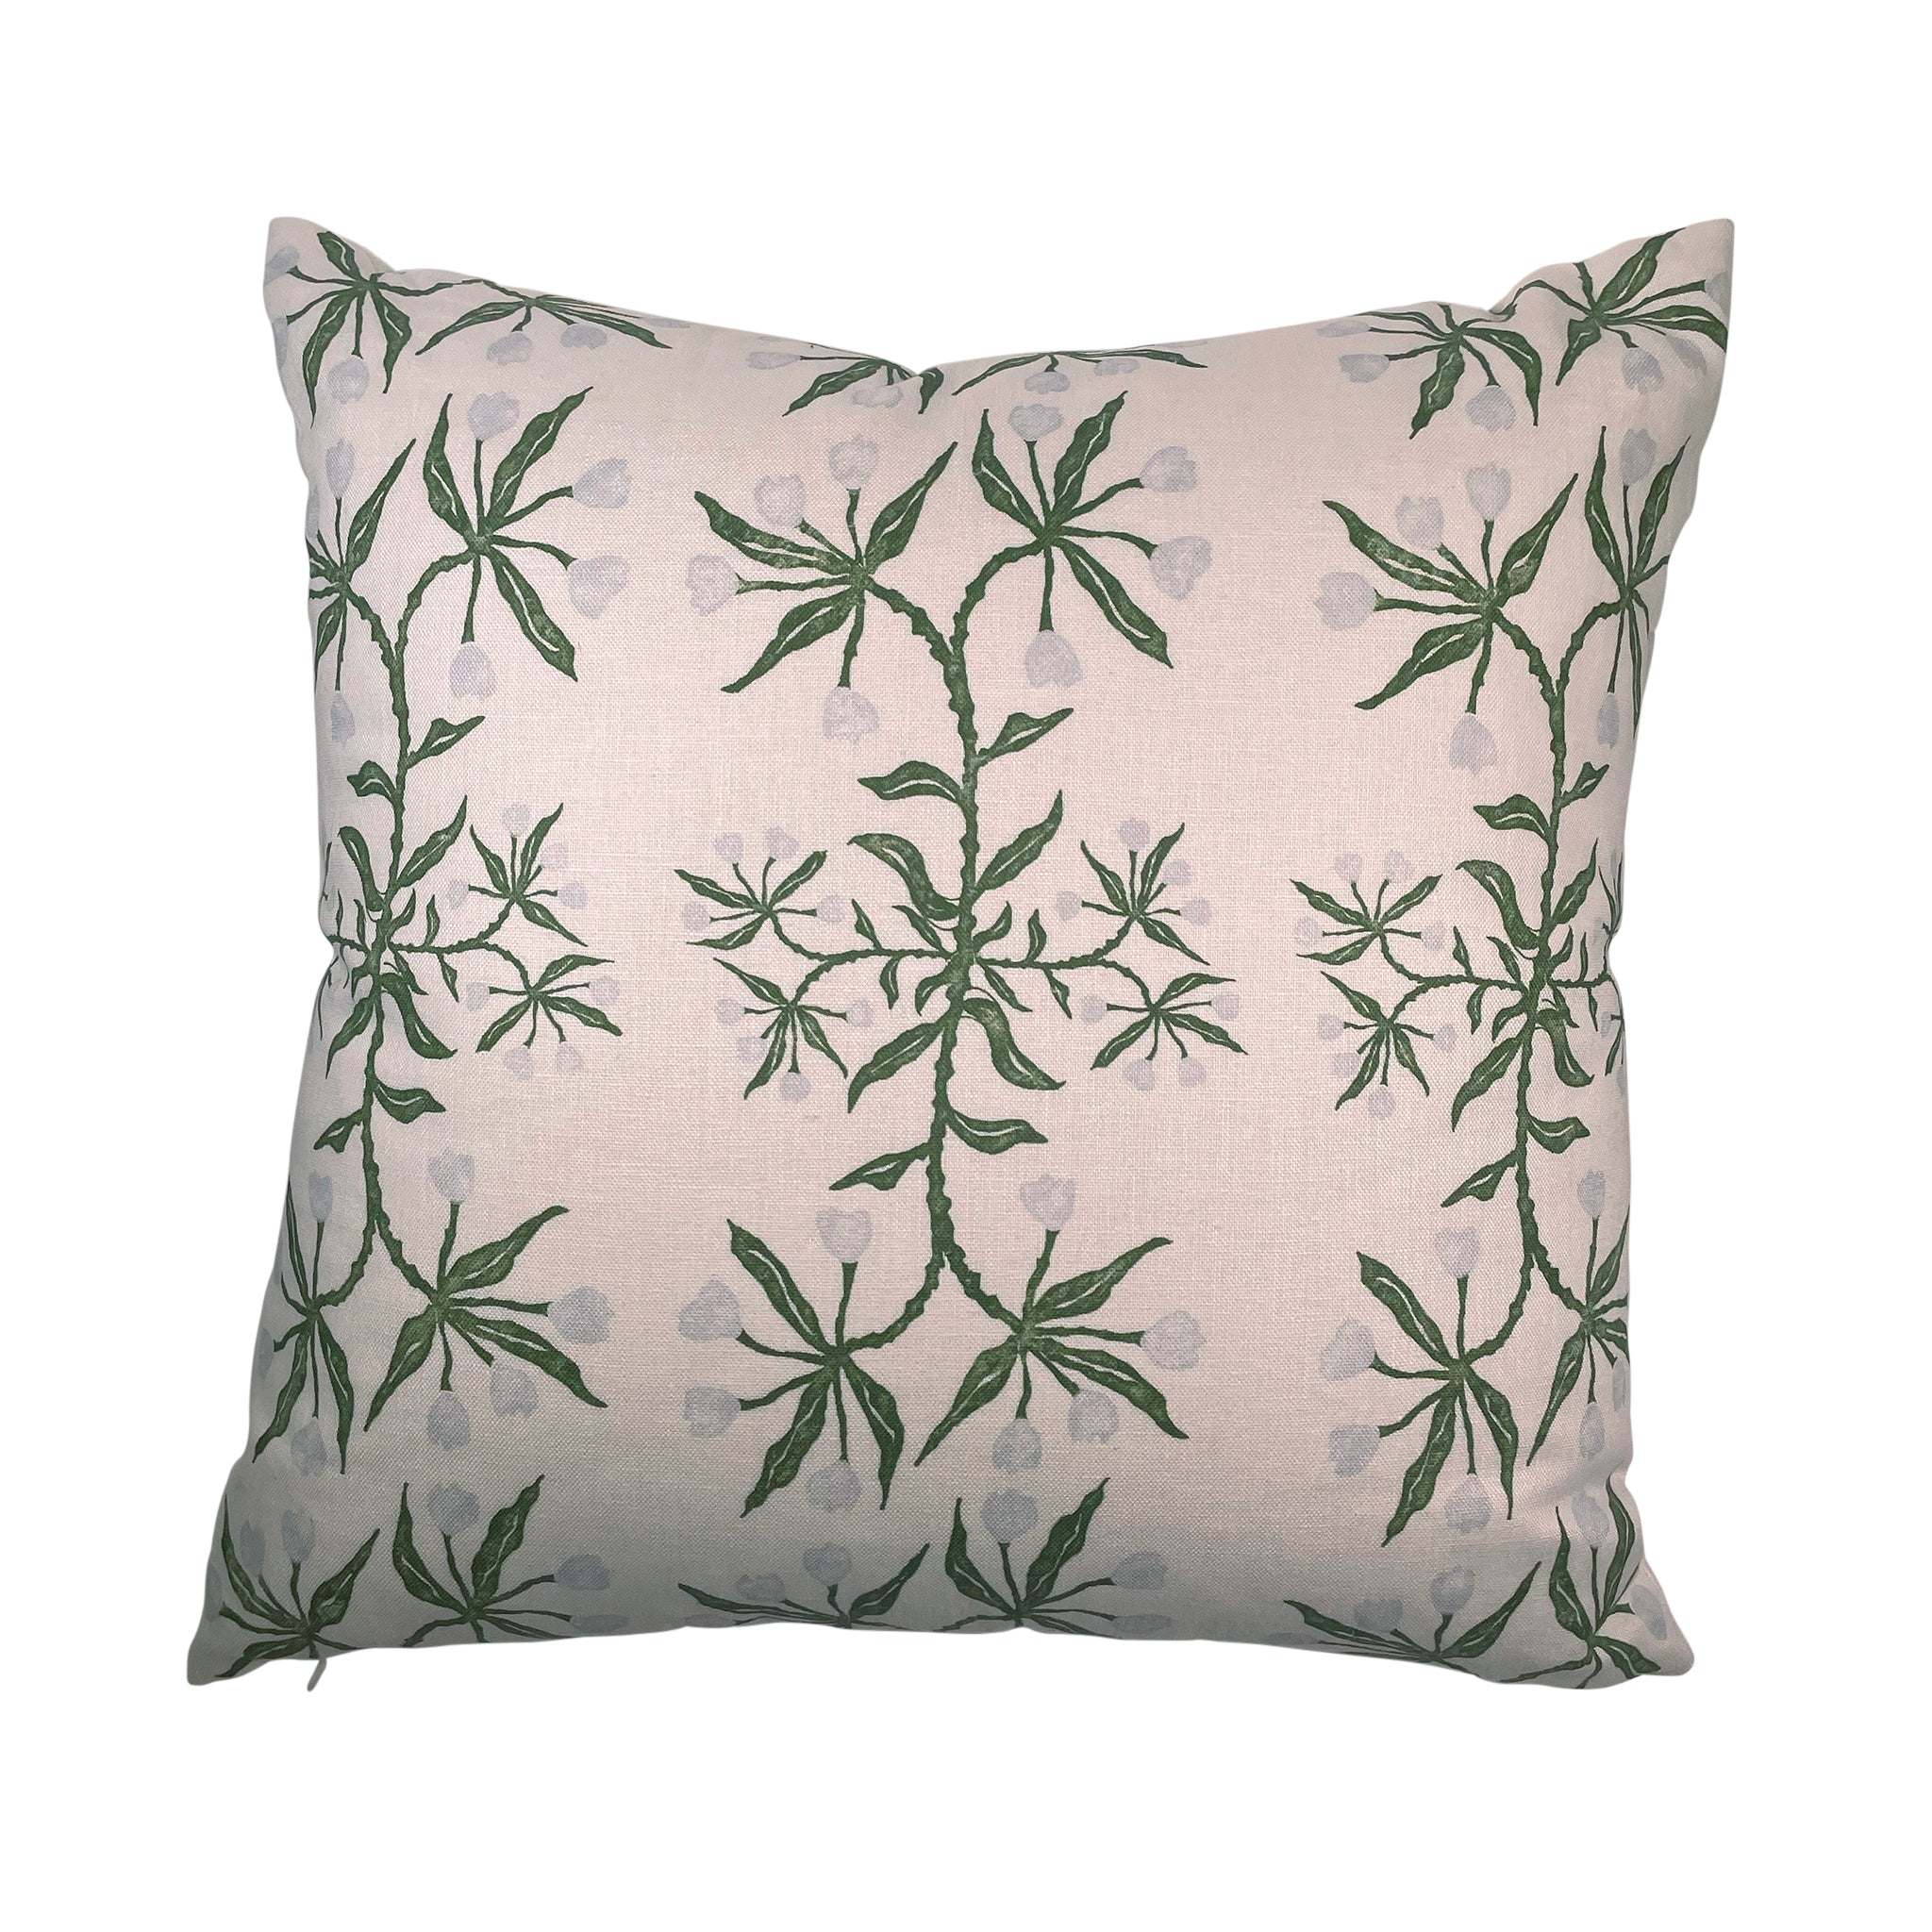 Best Buds Pillow in Olive & Porcelain